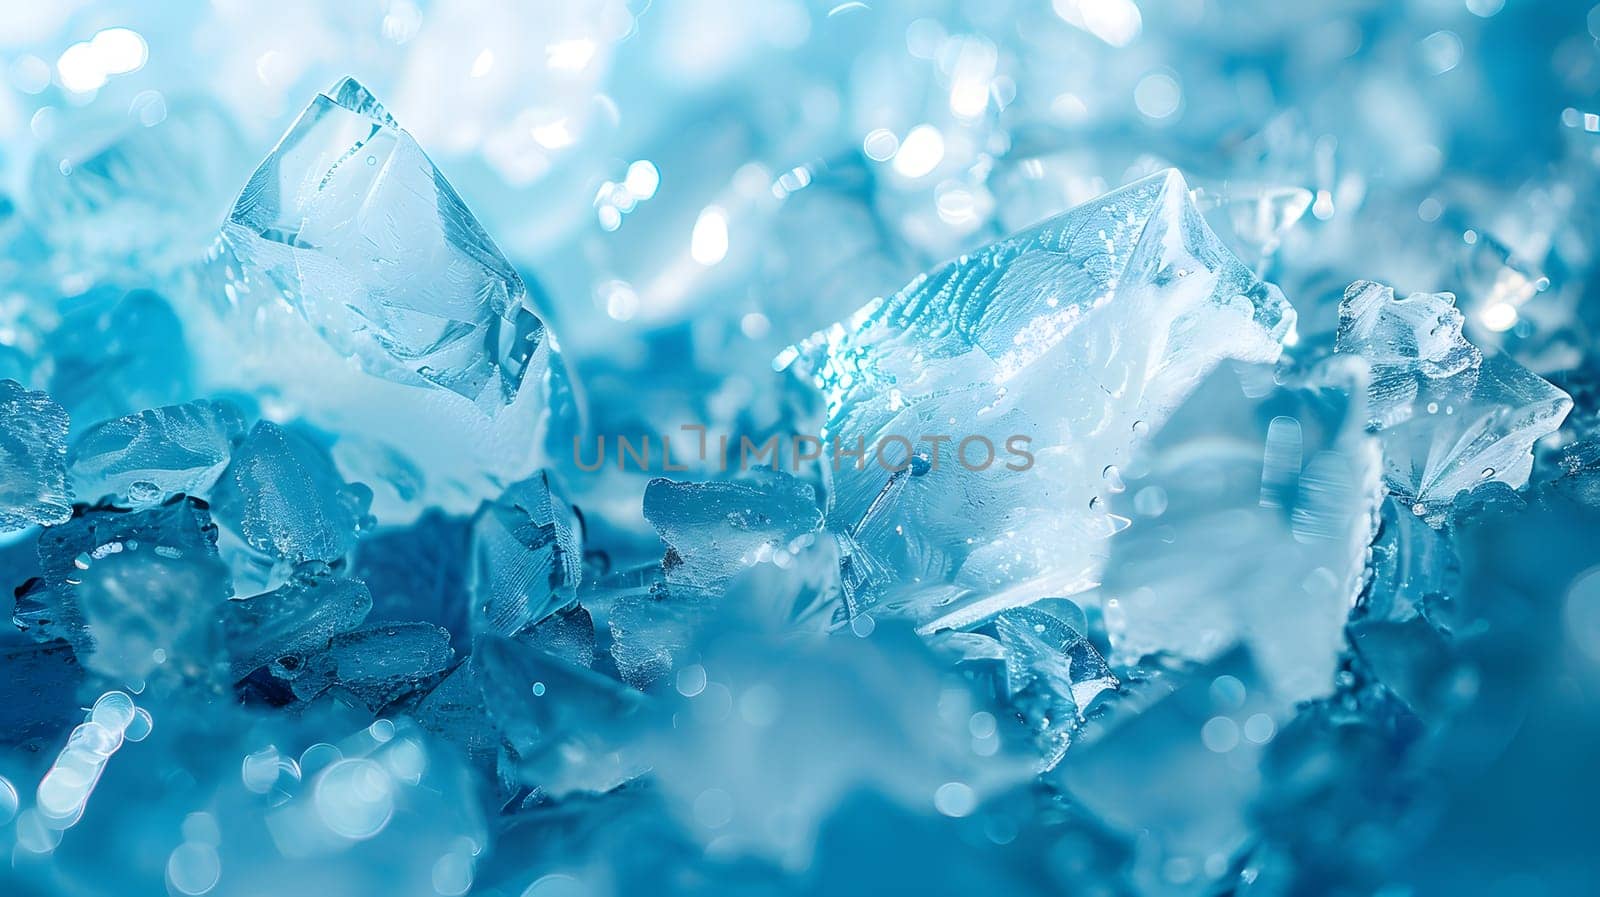 Closeup of liquid water freezing into ice cubes on an electric blue background. The natural material forms a pattern resembling a winter landscape, making it a fashionable accessory